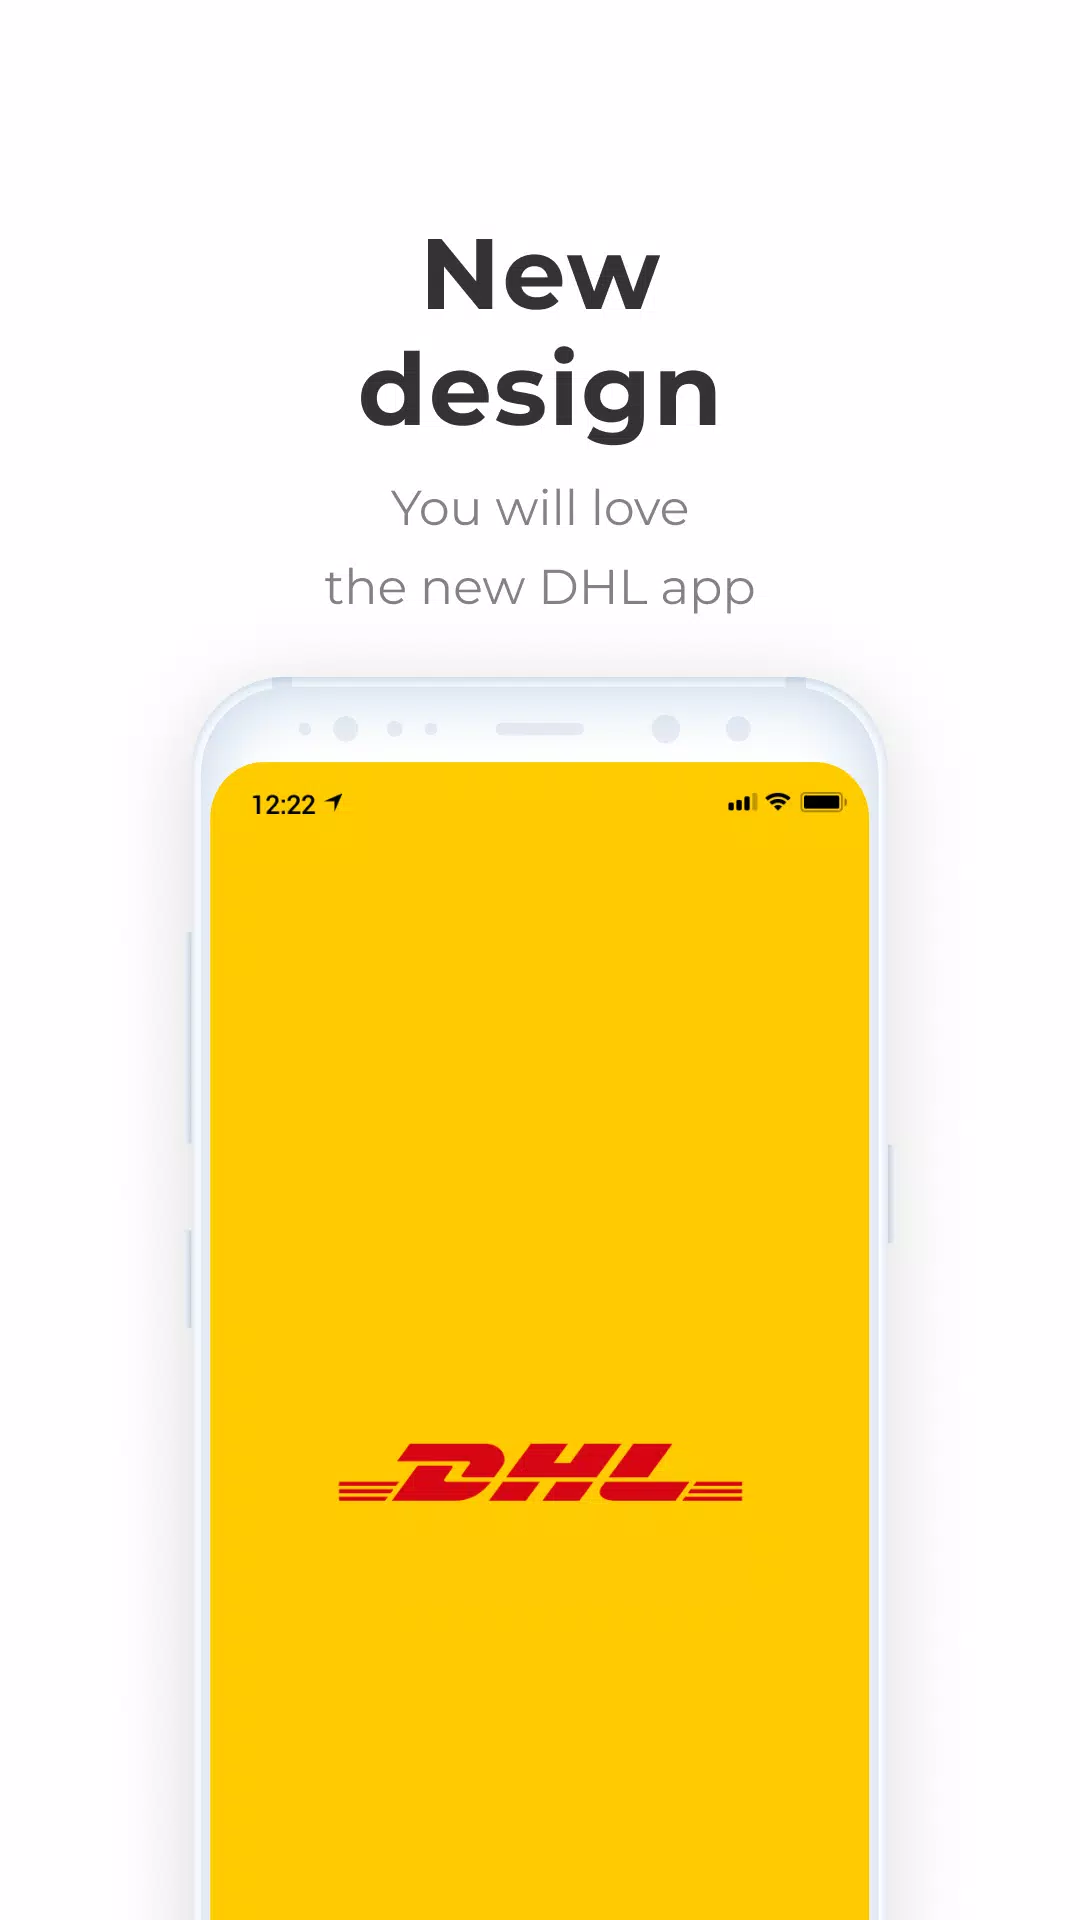 DEMO DHL Express for Android - APK Download